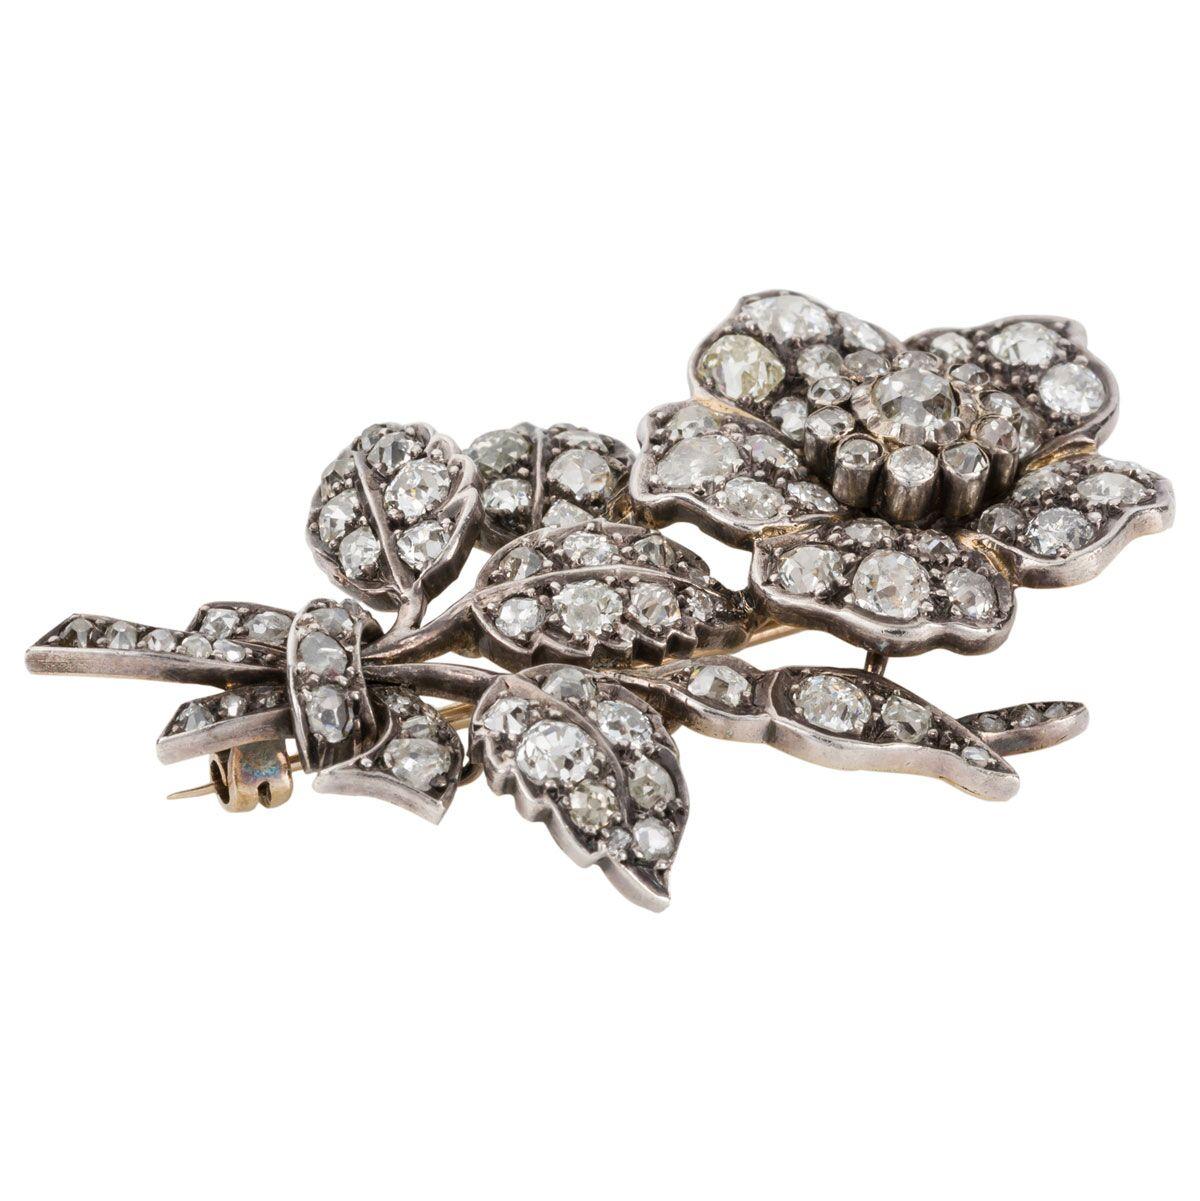 I just love this brooch, it's divine. A mix of old cut diamonds, ranging from old rose cuts, mine cuts to cushions. So interesting, don't you wish it could talk. Looks beautiful on a jacket, even a denim jacket for a little bit of fun and gets